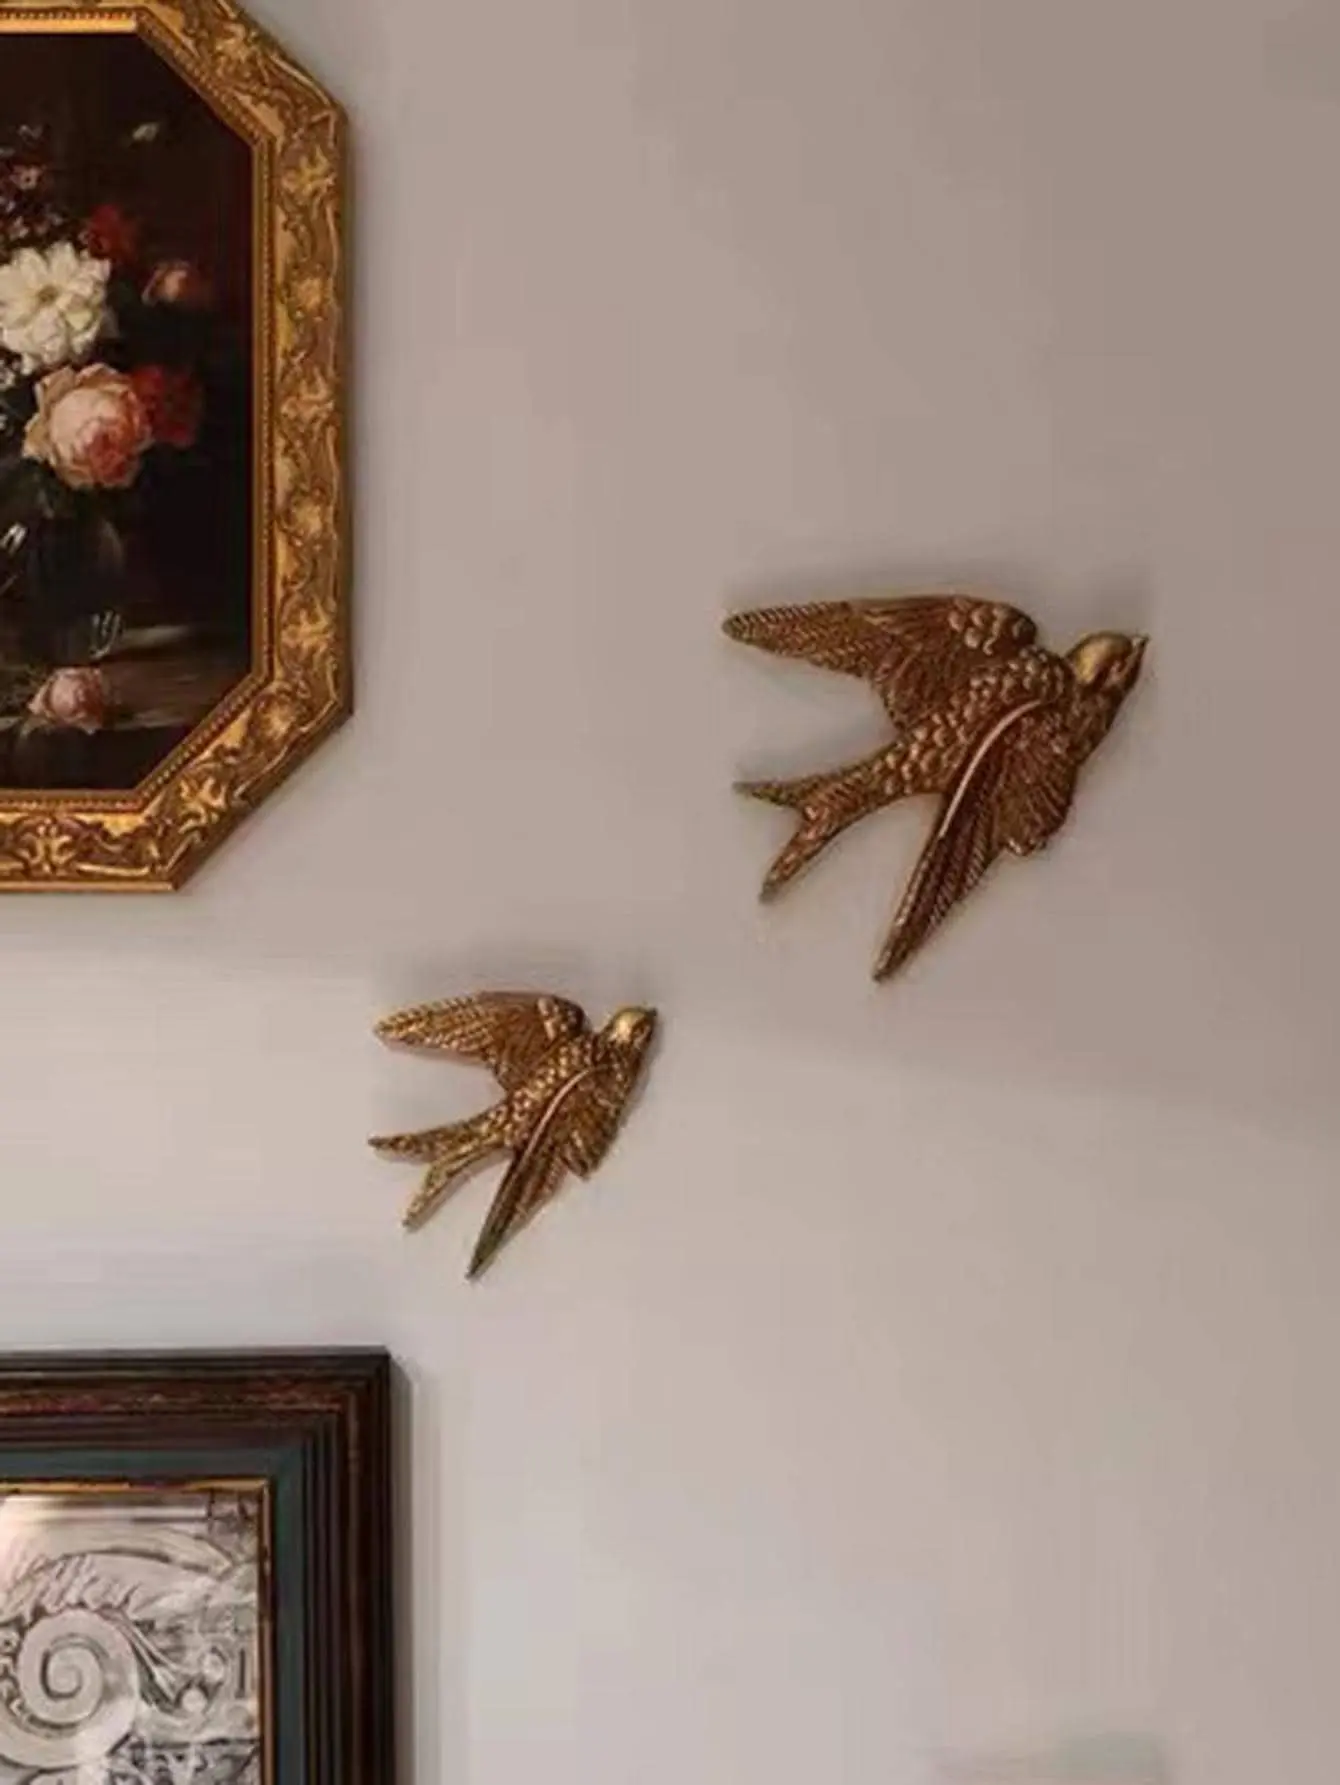 Resin Swallow Crafts Retro vintage gold mini gift hanging creative home decor wholesale European style